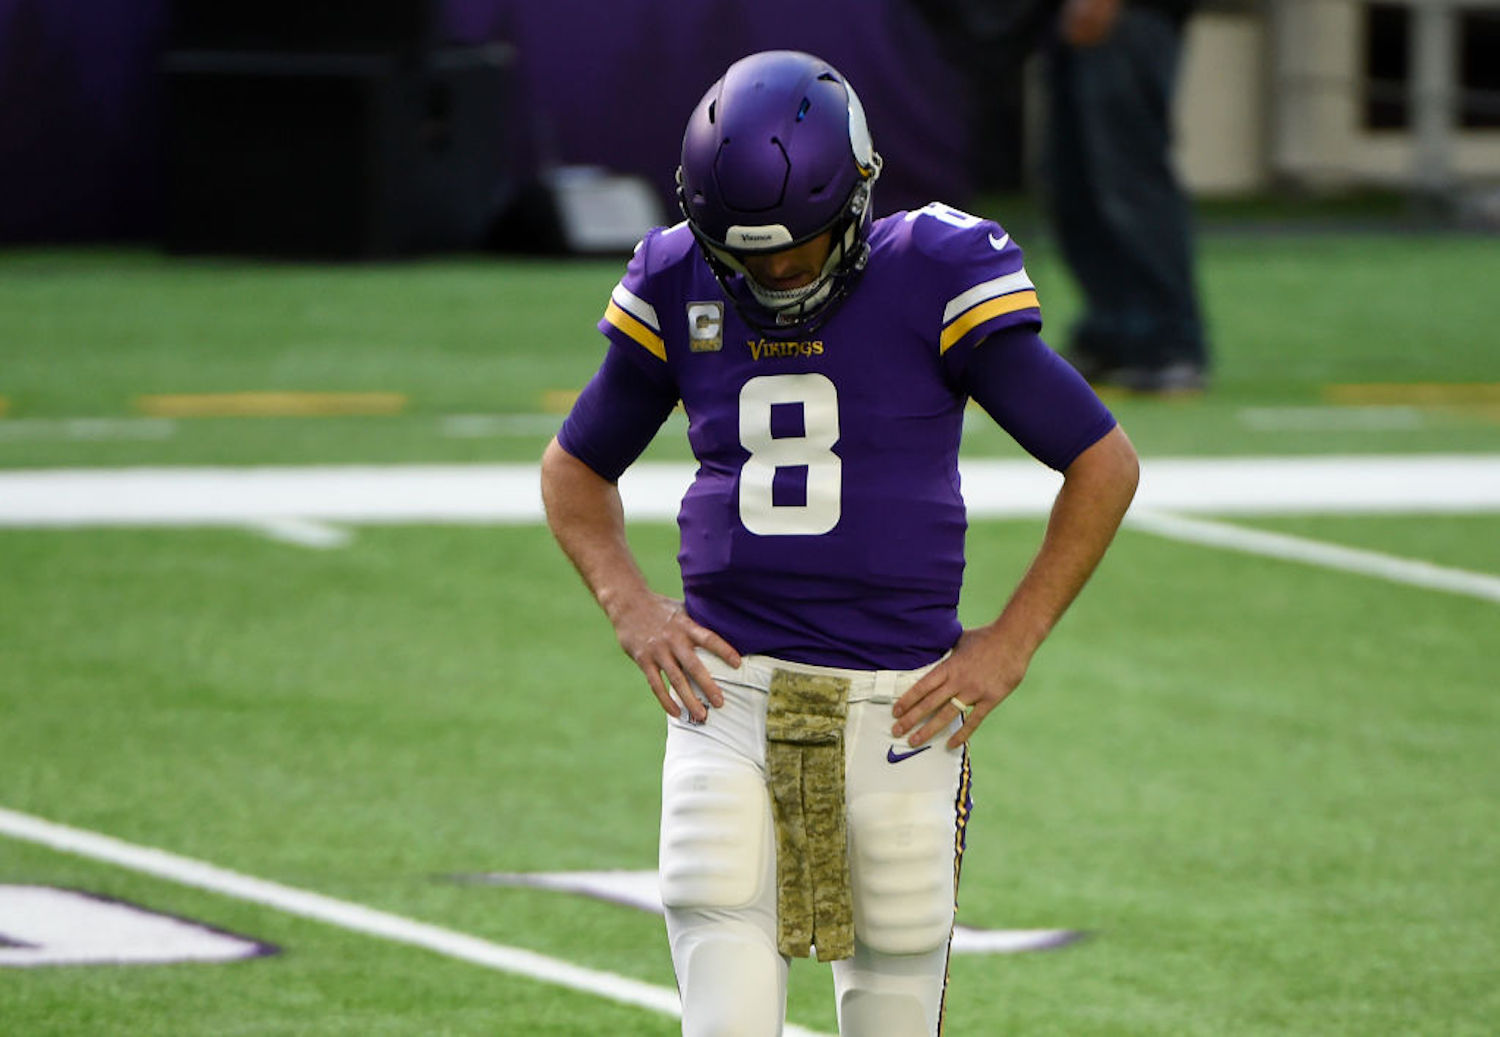 The Vikings are 3.5-point road favorites against the Bears on Monday night, but Kirk Cousins' MNF record should have you looking at the underdog.